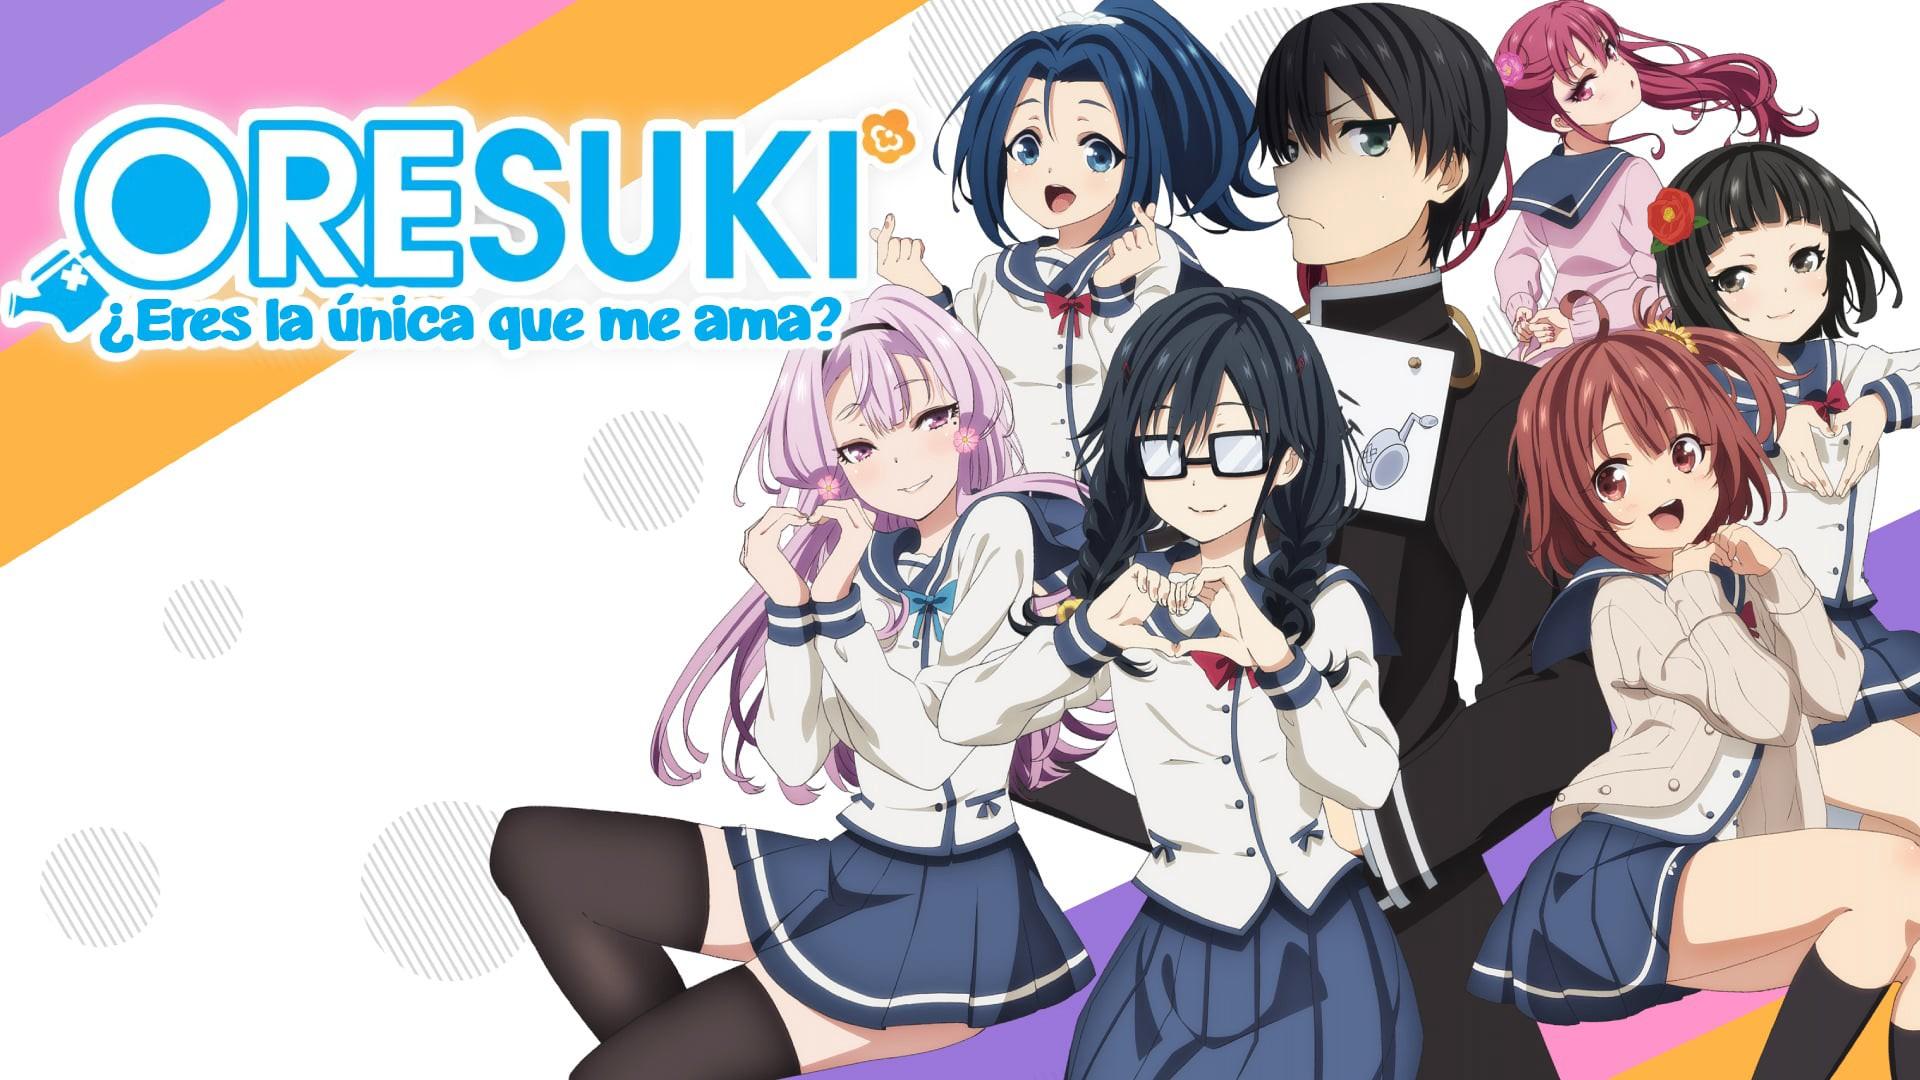 ORESUKI: Are you the only one who loves me? 1x04 “Episode 4